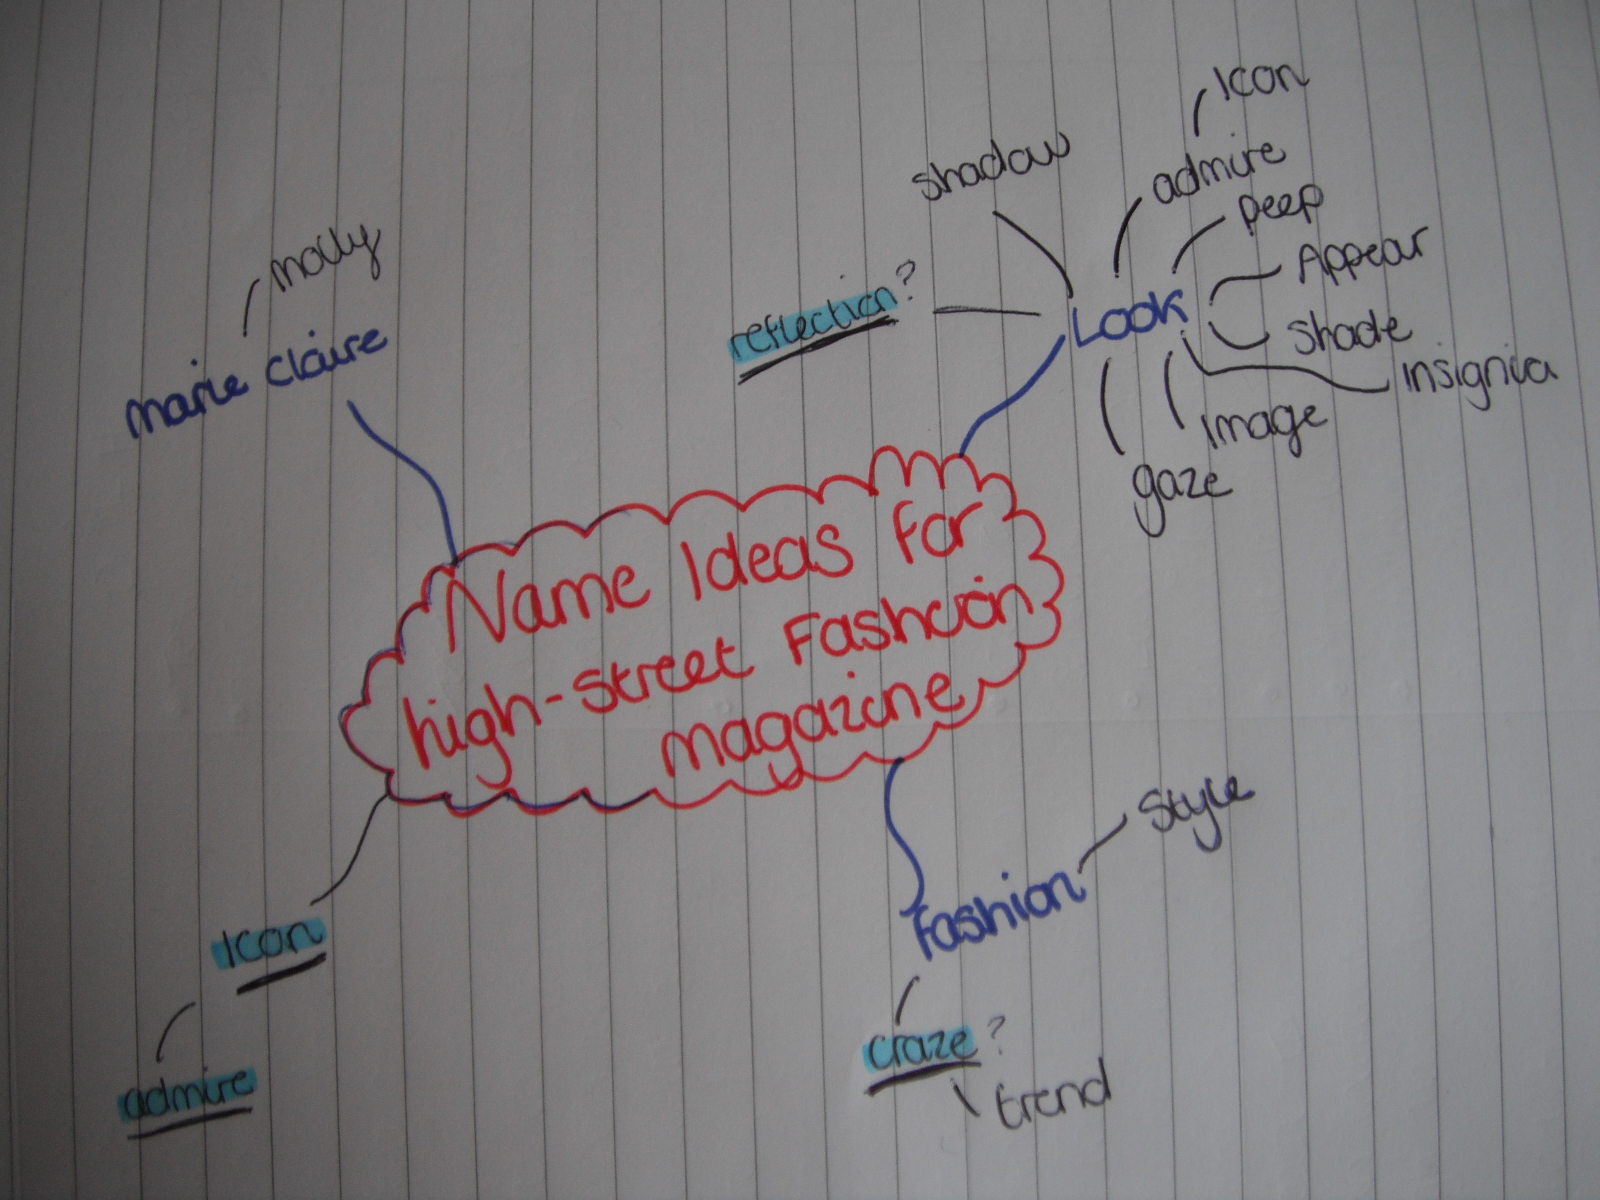 Ideas for media coursework a2